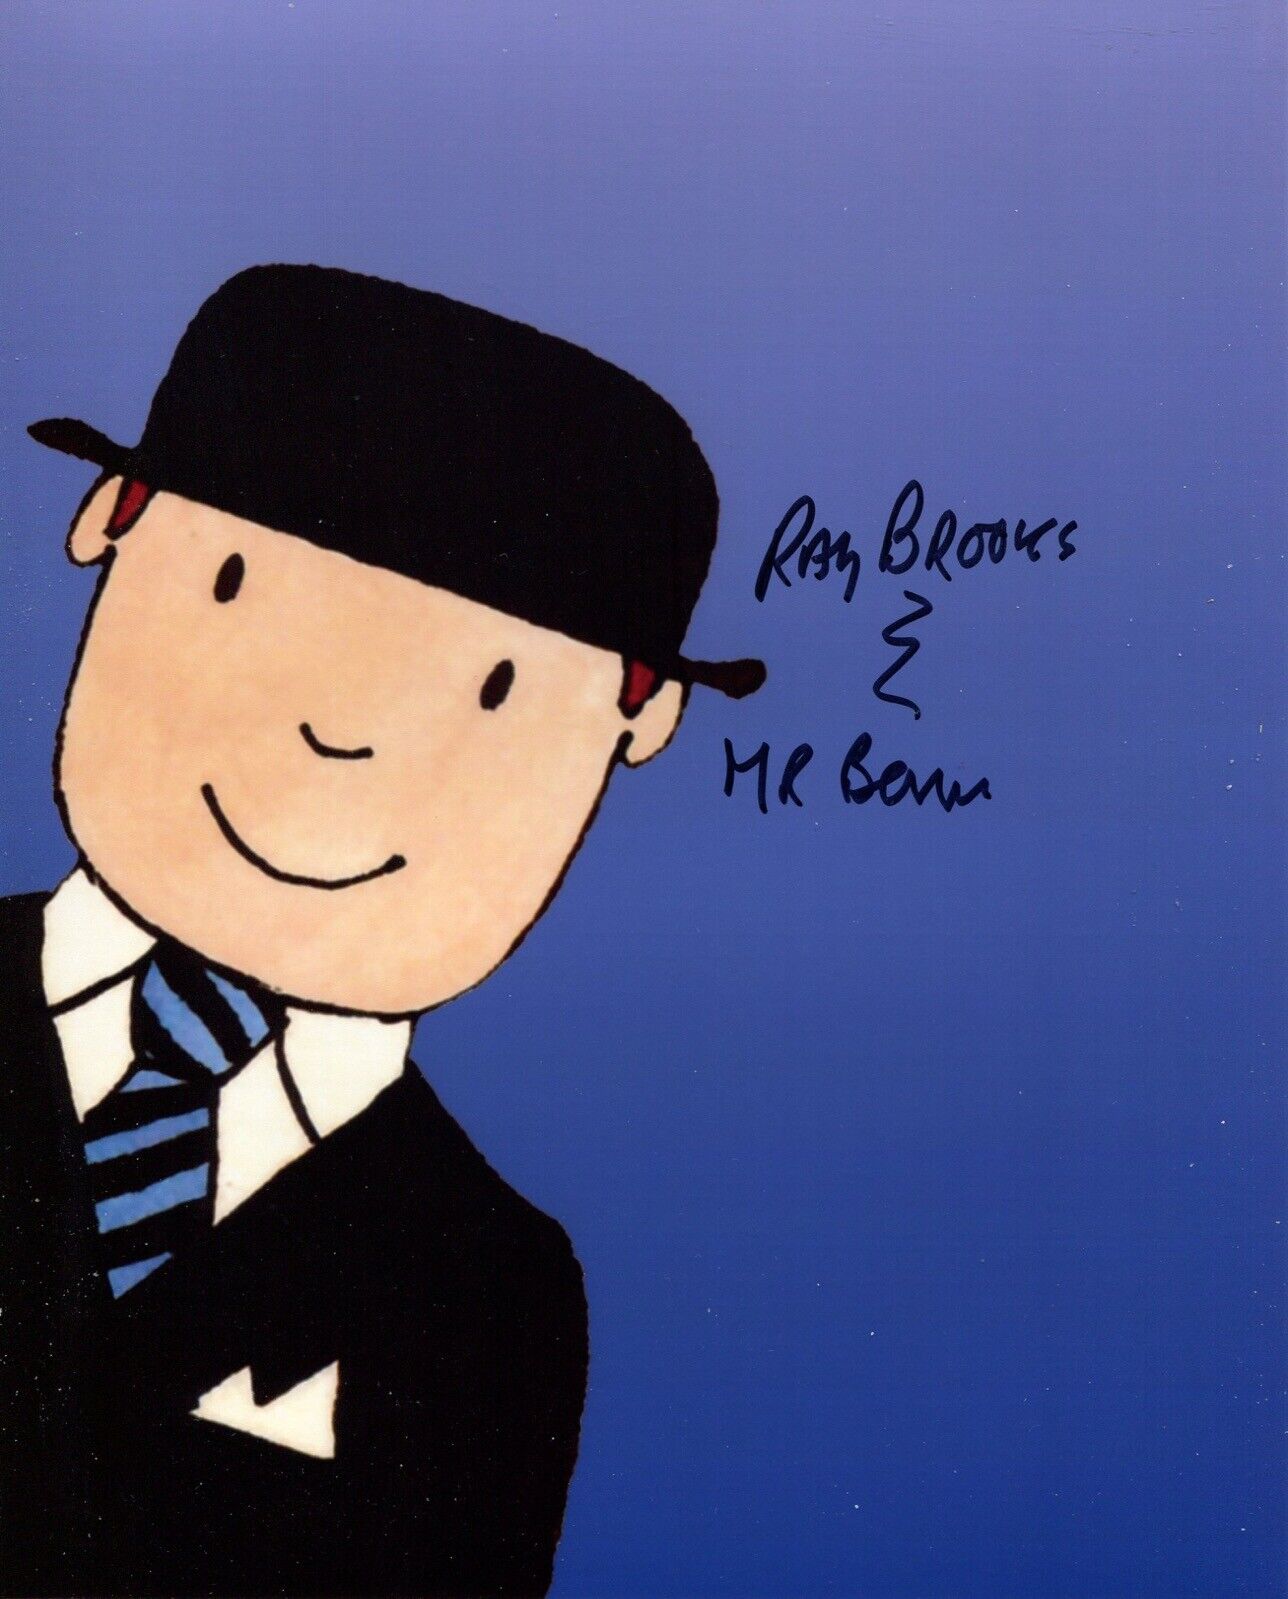 Children’s TV series MR BENN narrator Ray Brooks signed Photo Poster painting No8 WITH PROOF!